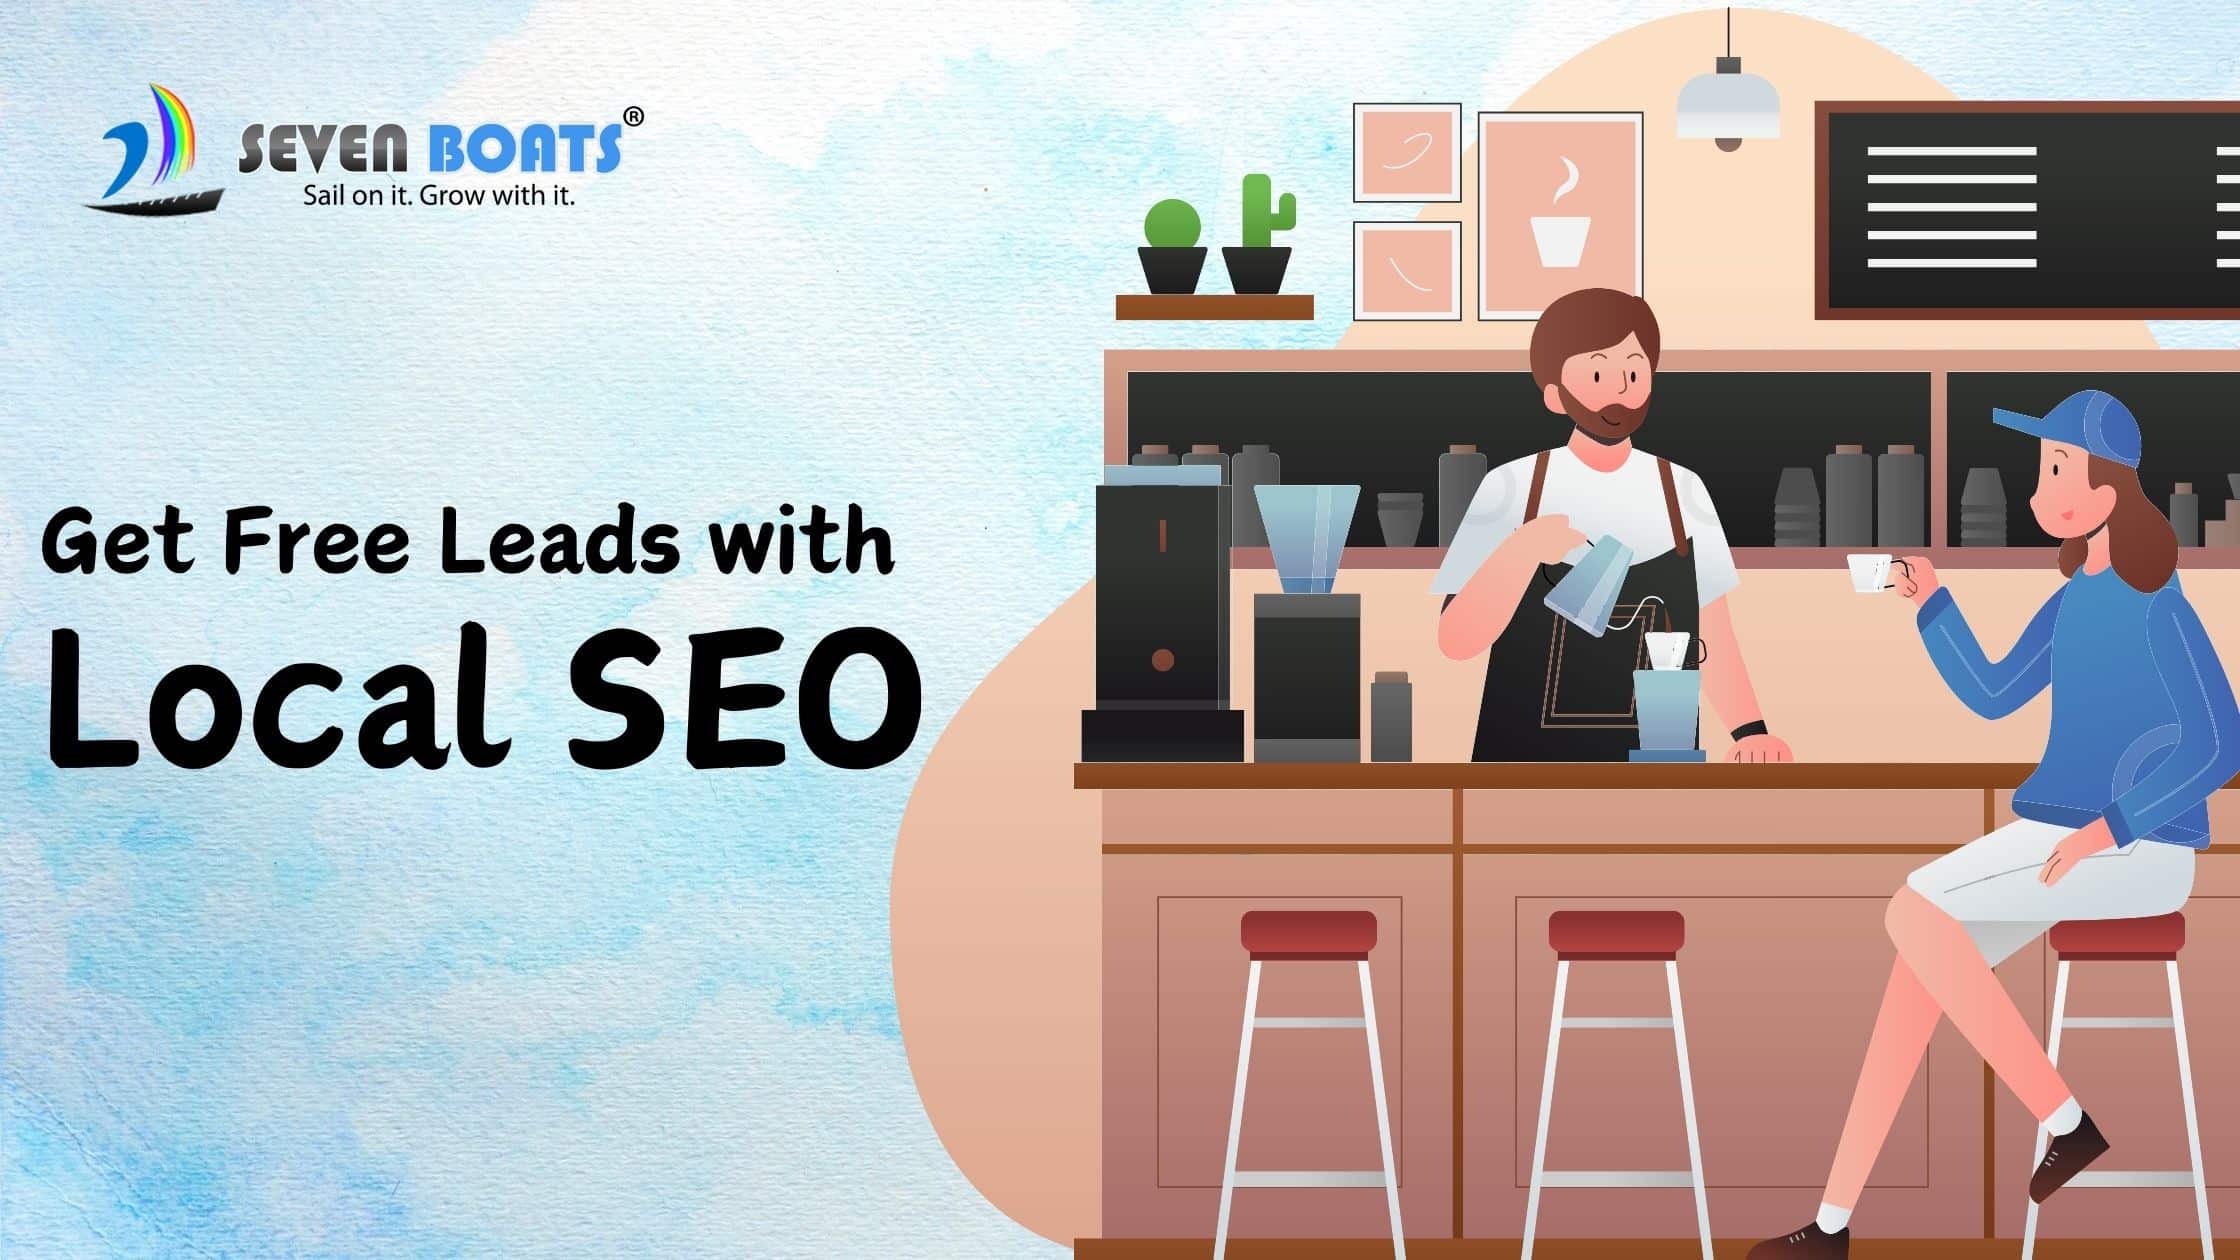 Get Free Leads with Local SEO